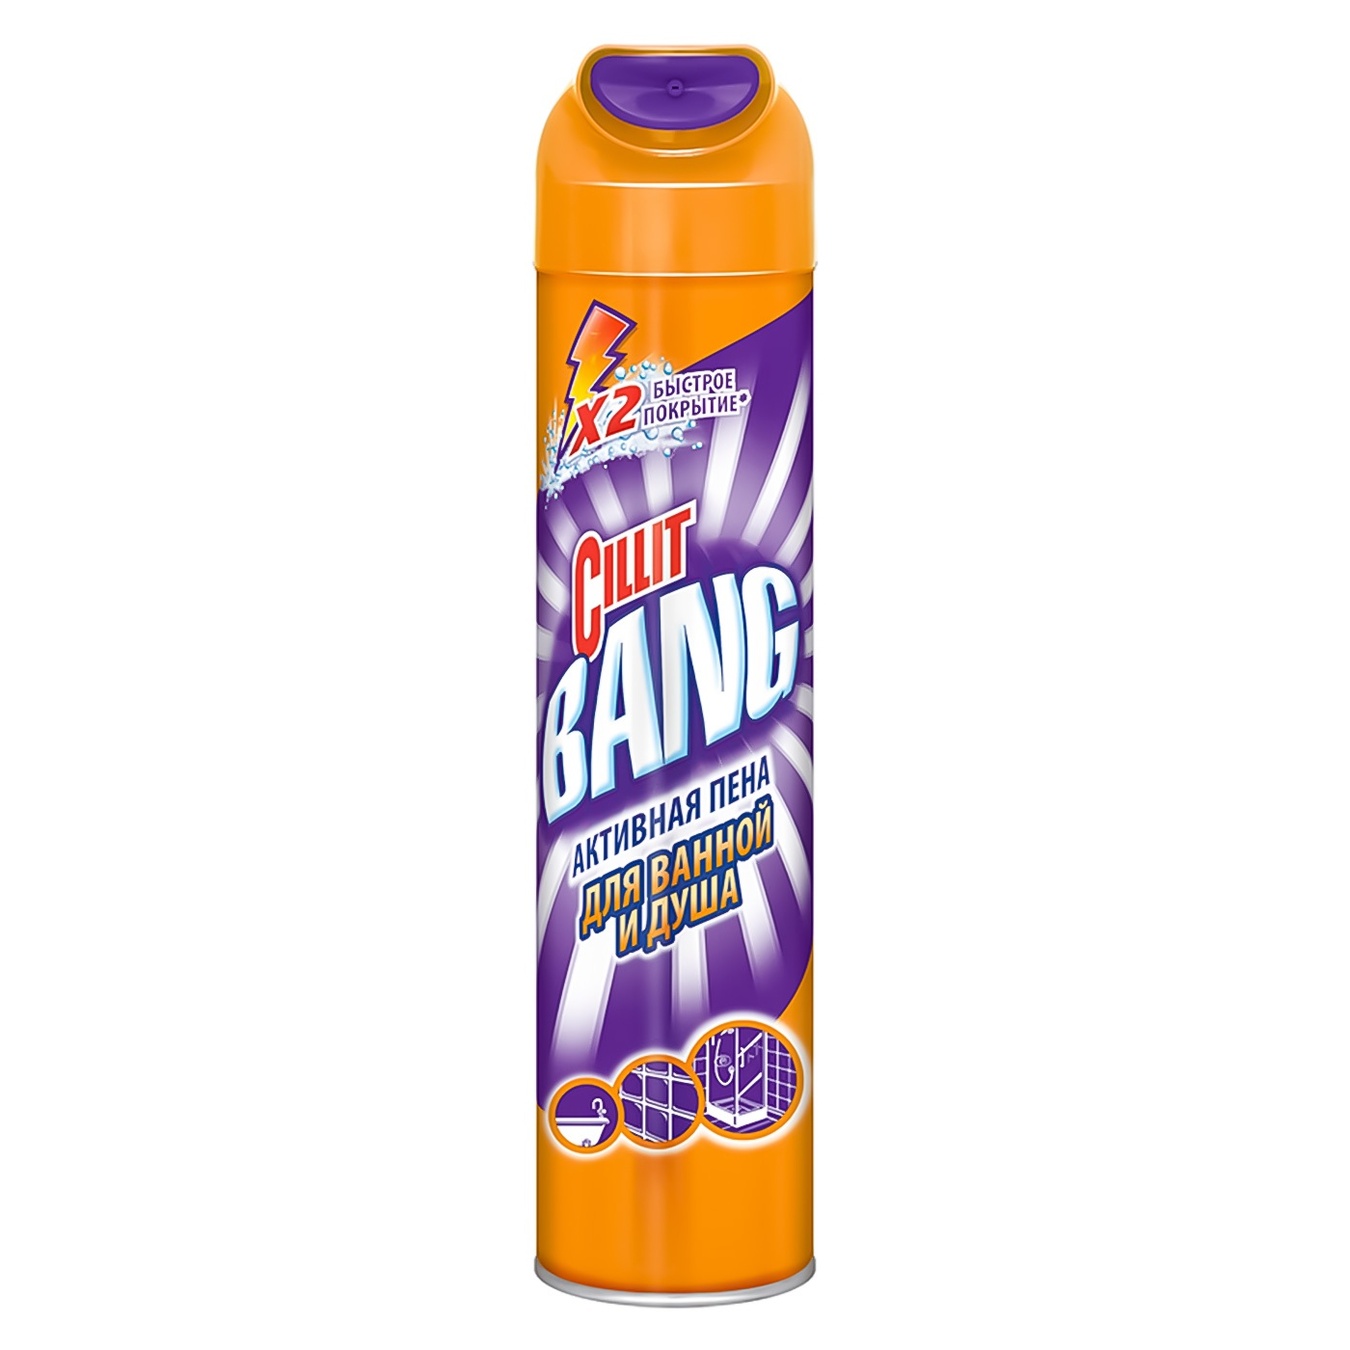 Cillit Bang Active bath and shower foam 600ml